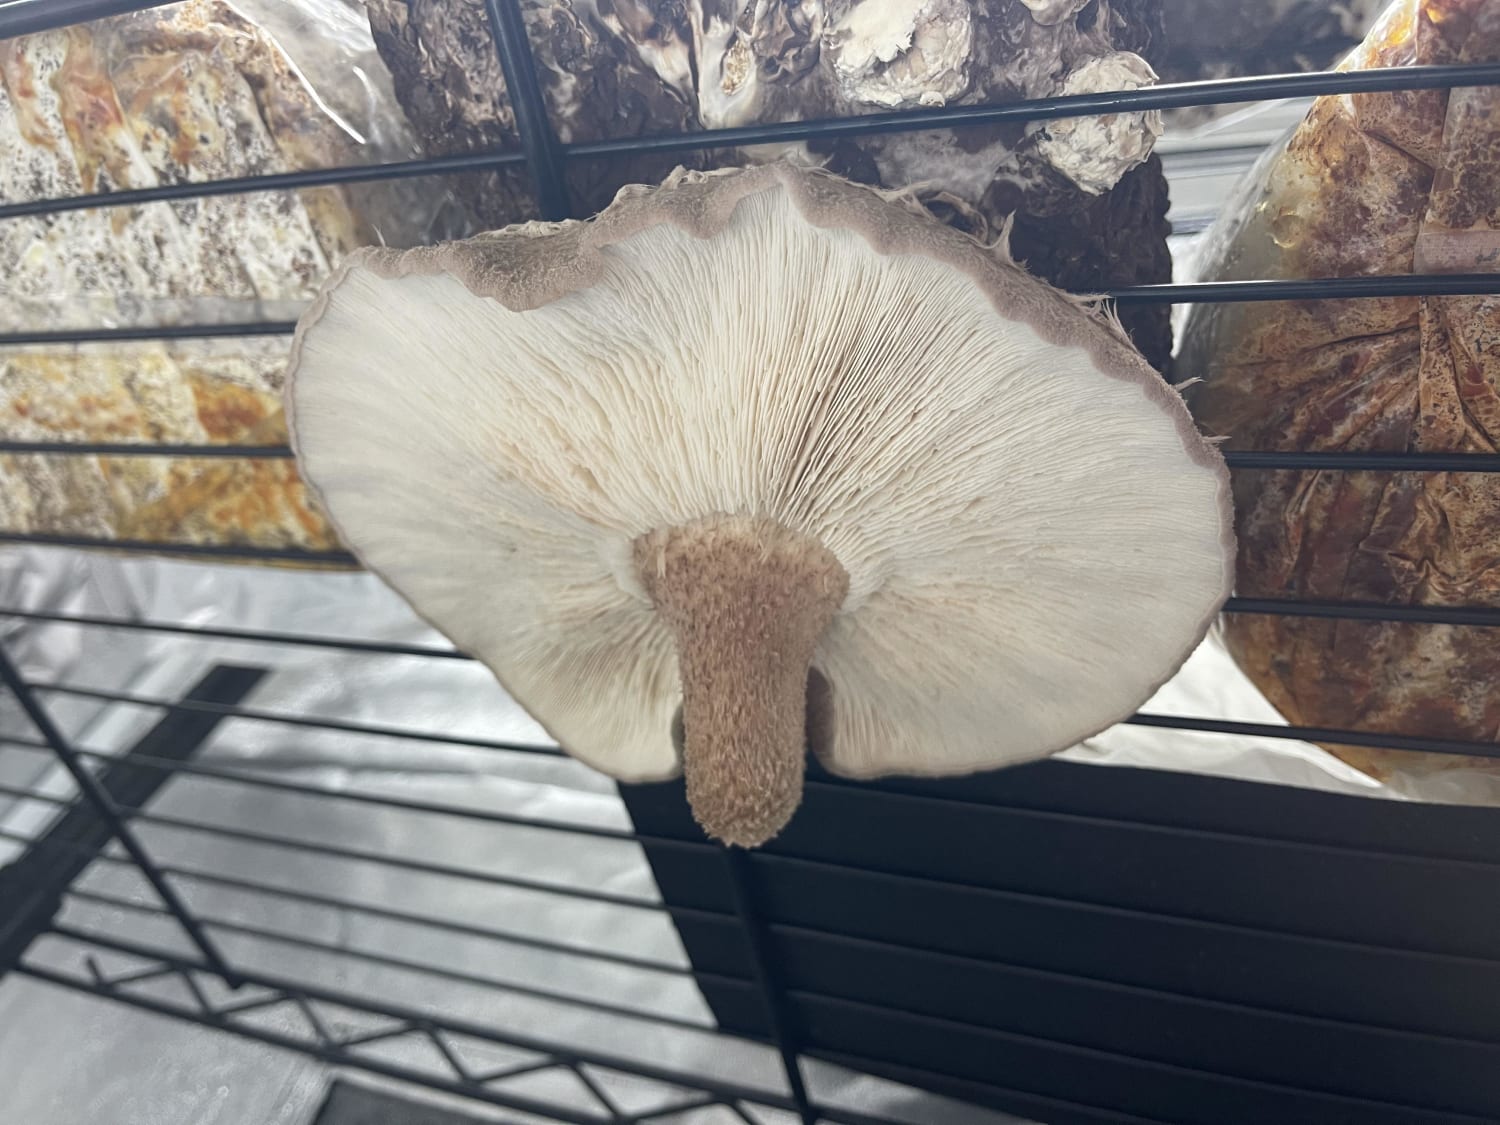 This shiitake fruited under my shelf overnight. It was an absolute unit. Almost 9 inches wide